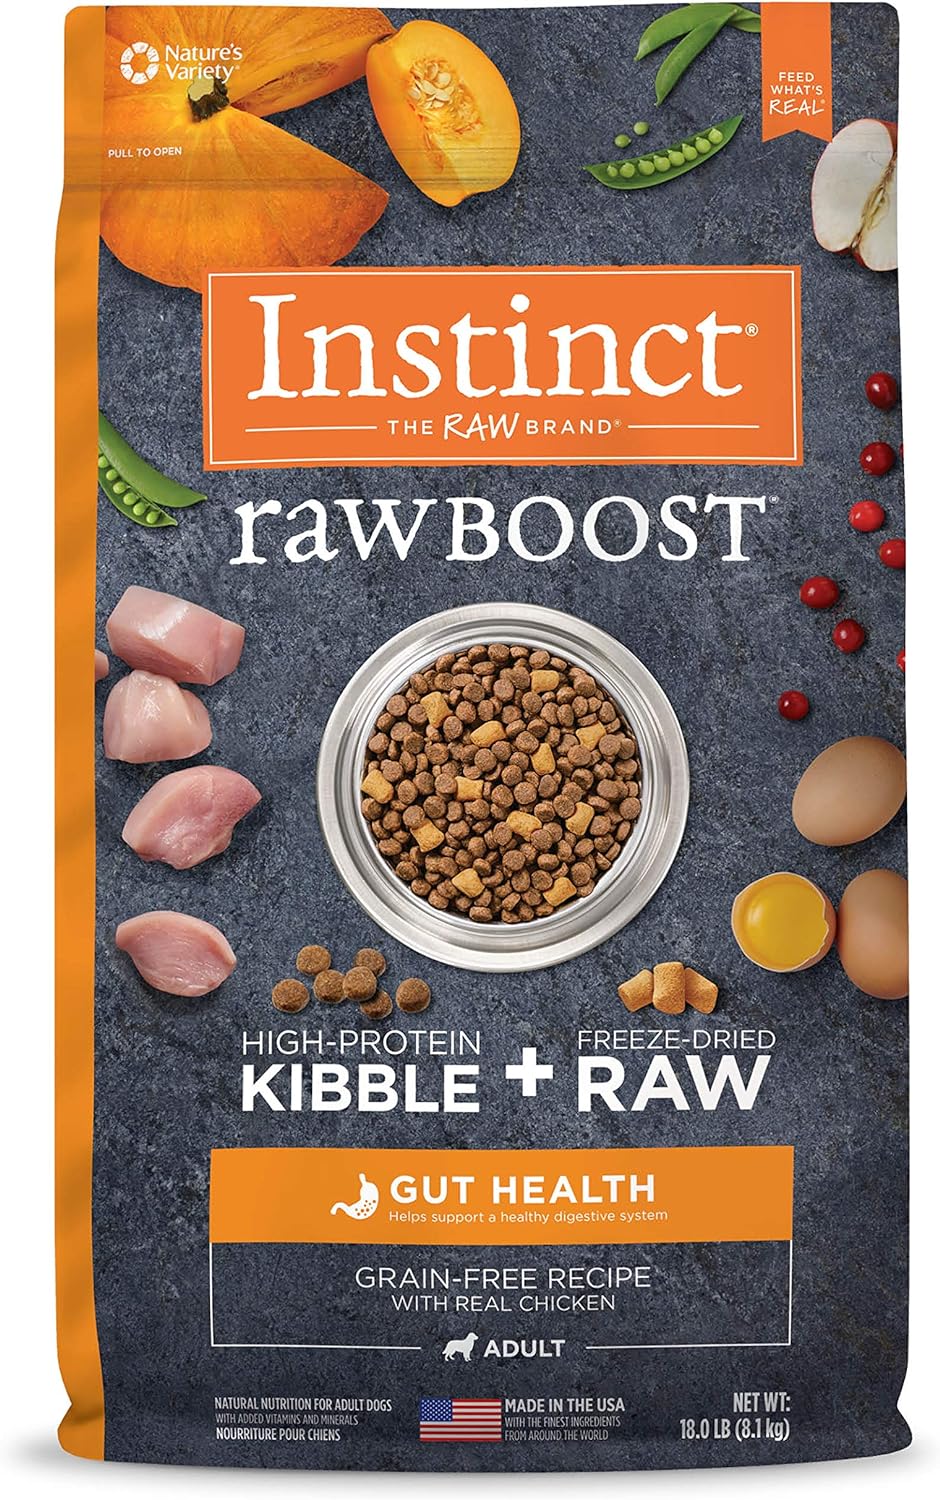 Instinct Raw Boost Grain-Free Recipe with Real Chicken for Gut Health Dry Dog Food – Gallery Image 1